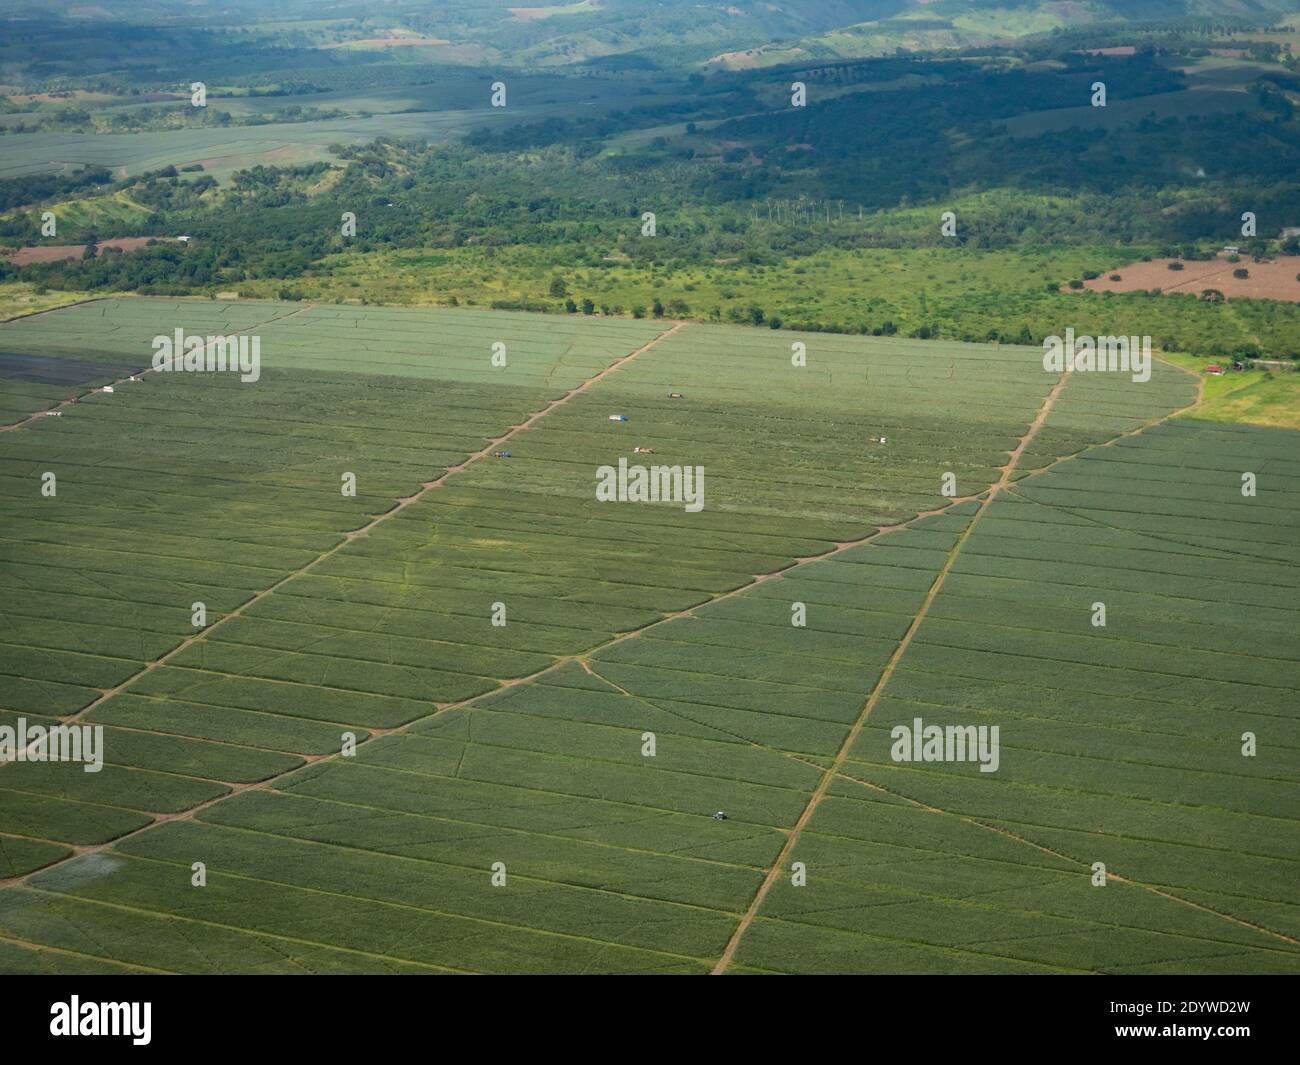 Aerial view of pineapple plantation near General Santos City in South Cotabato, Mindanao on the Philippines Stock Photo